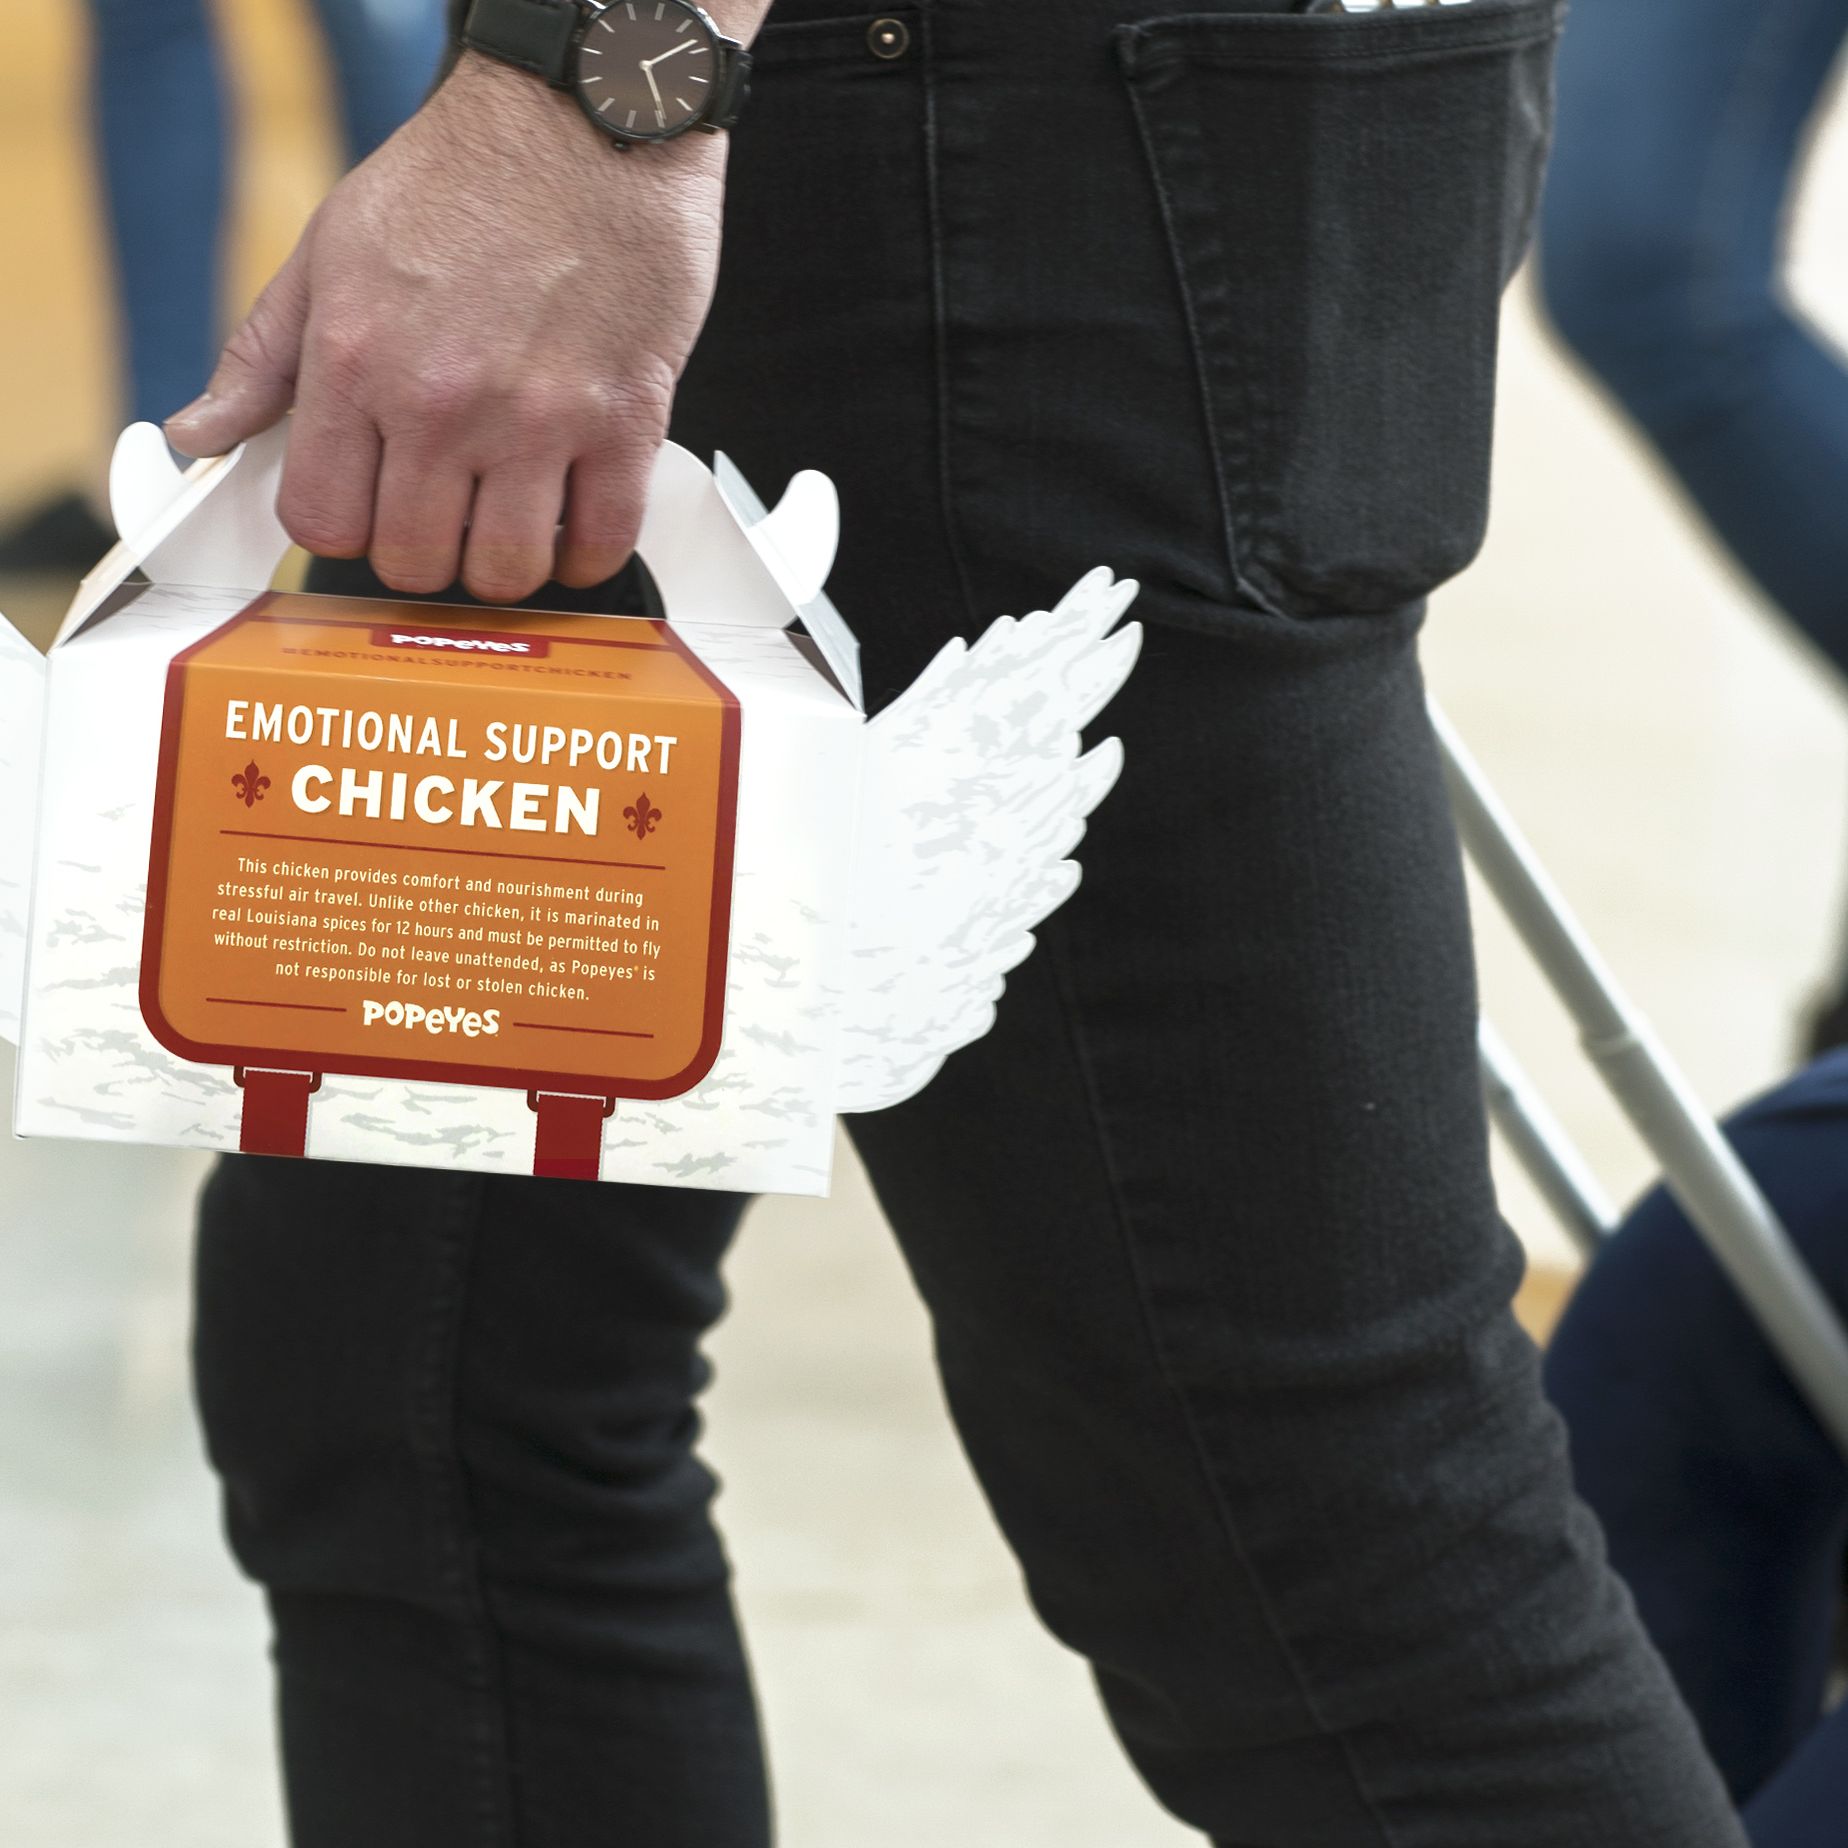 You Can Get 'Emotional Support Chicken' From Popeyes To Ease Your Holiday Travel Stress